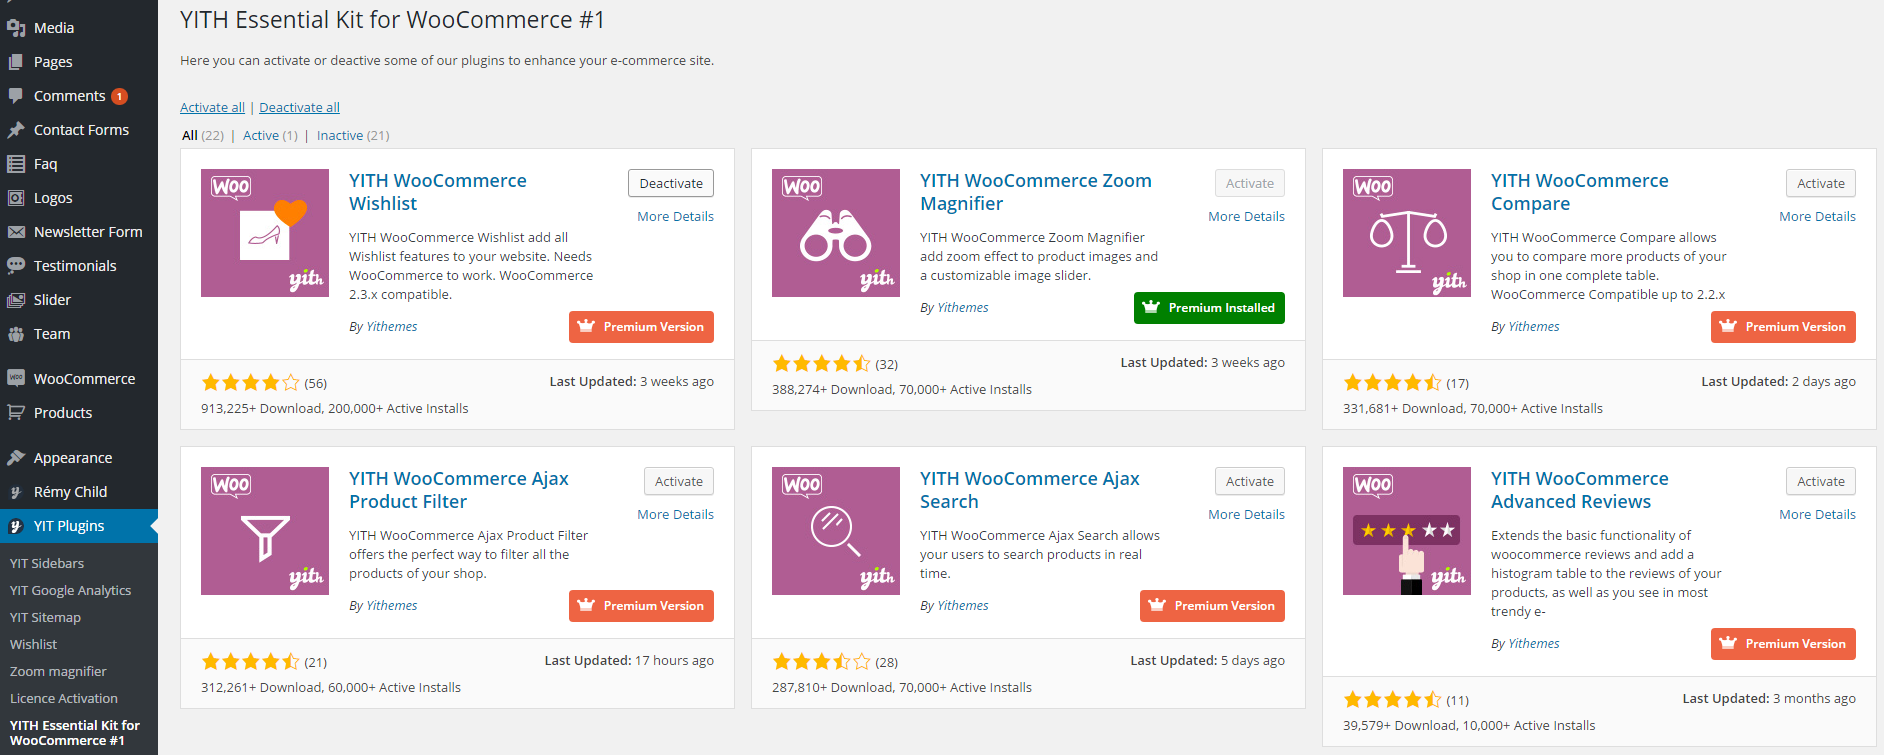 Download YITH Essential Kit for WooCommerce #1 1.6.1 – Free WordPress Plugin